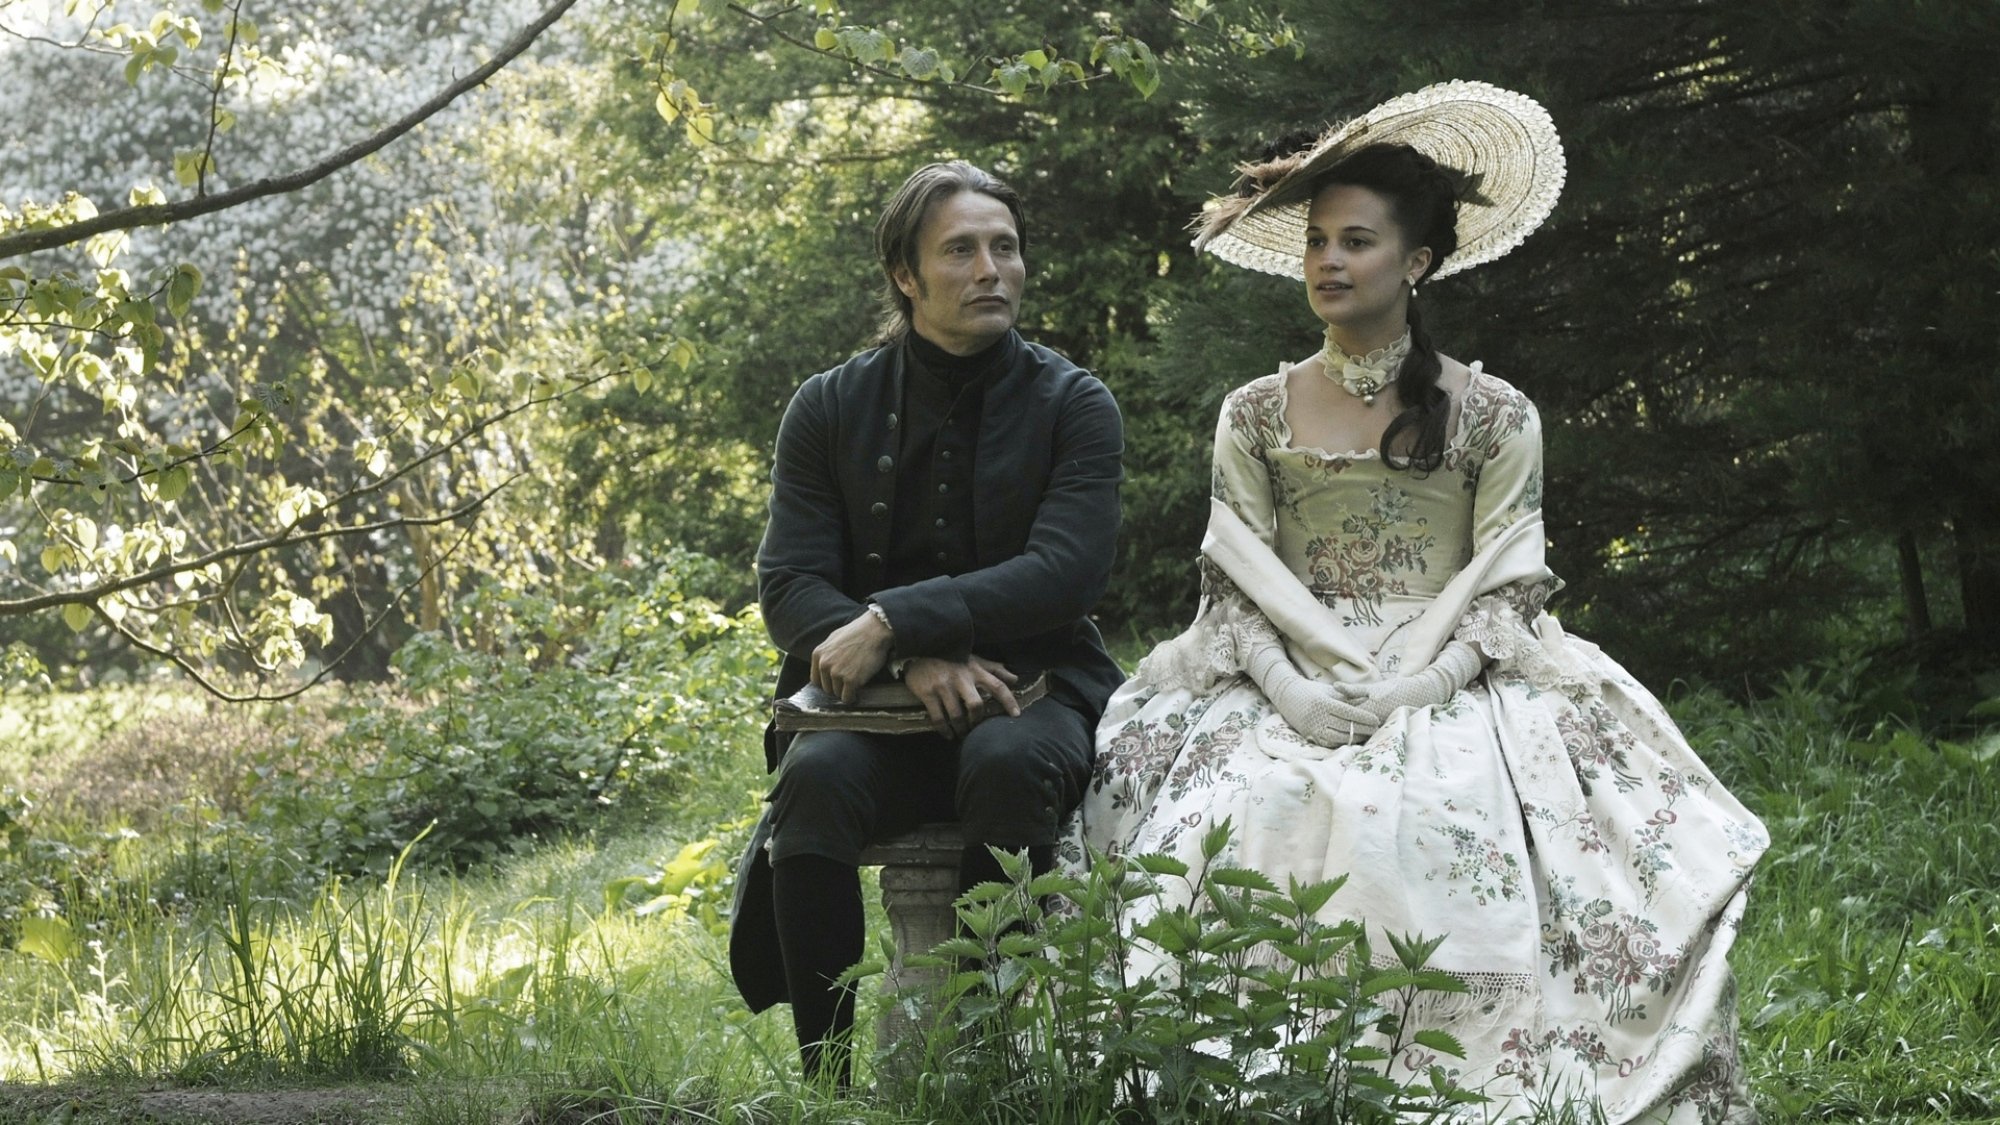 Mads Mikkelsen and Alicia Vikander in "A Royal Affair."